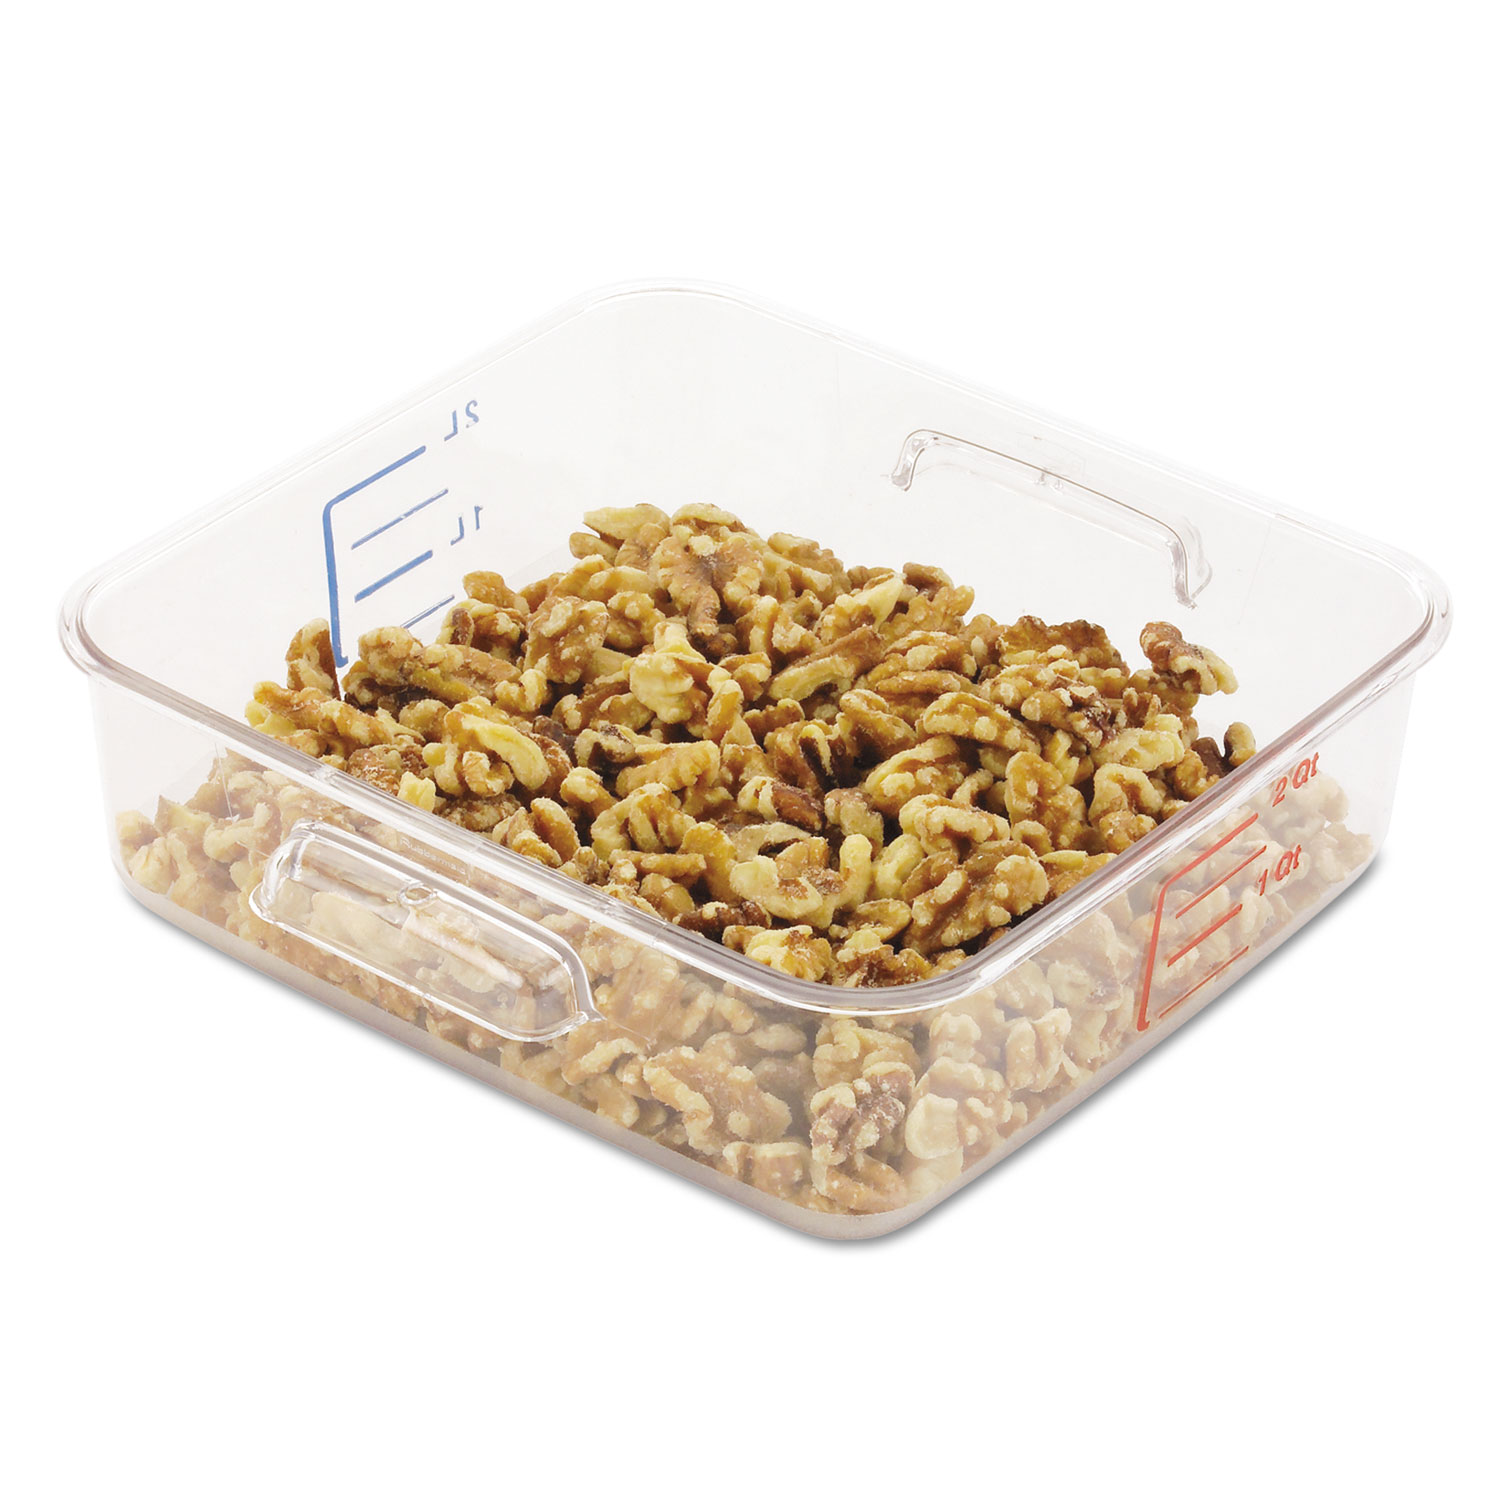 SpaceSaver Square Containers, 2qt, 8 4/5w x 8 3/4d x 2 7/10h, Clear